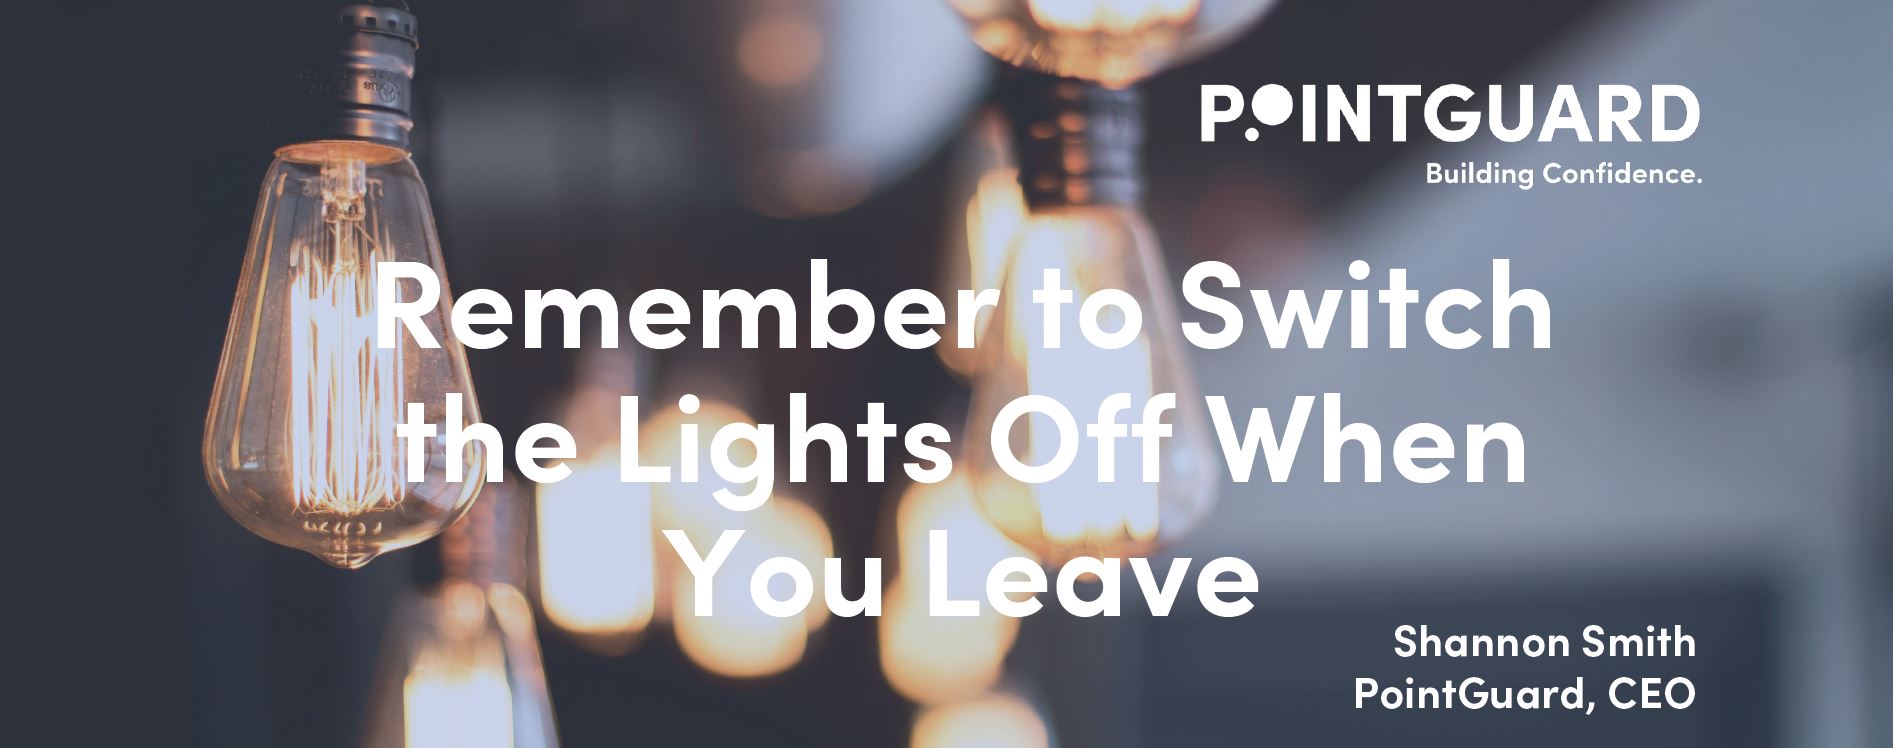 Remember to Switch the Lights Off When You Leave